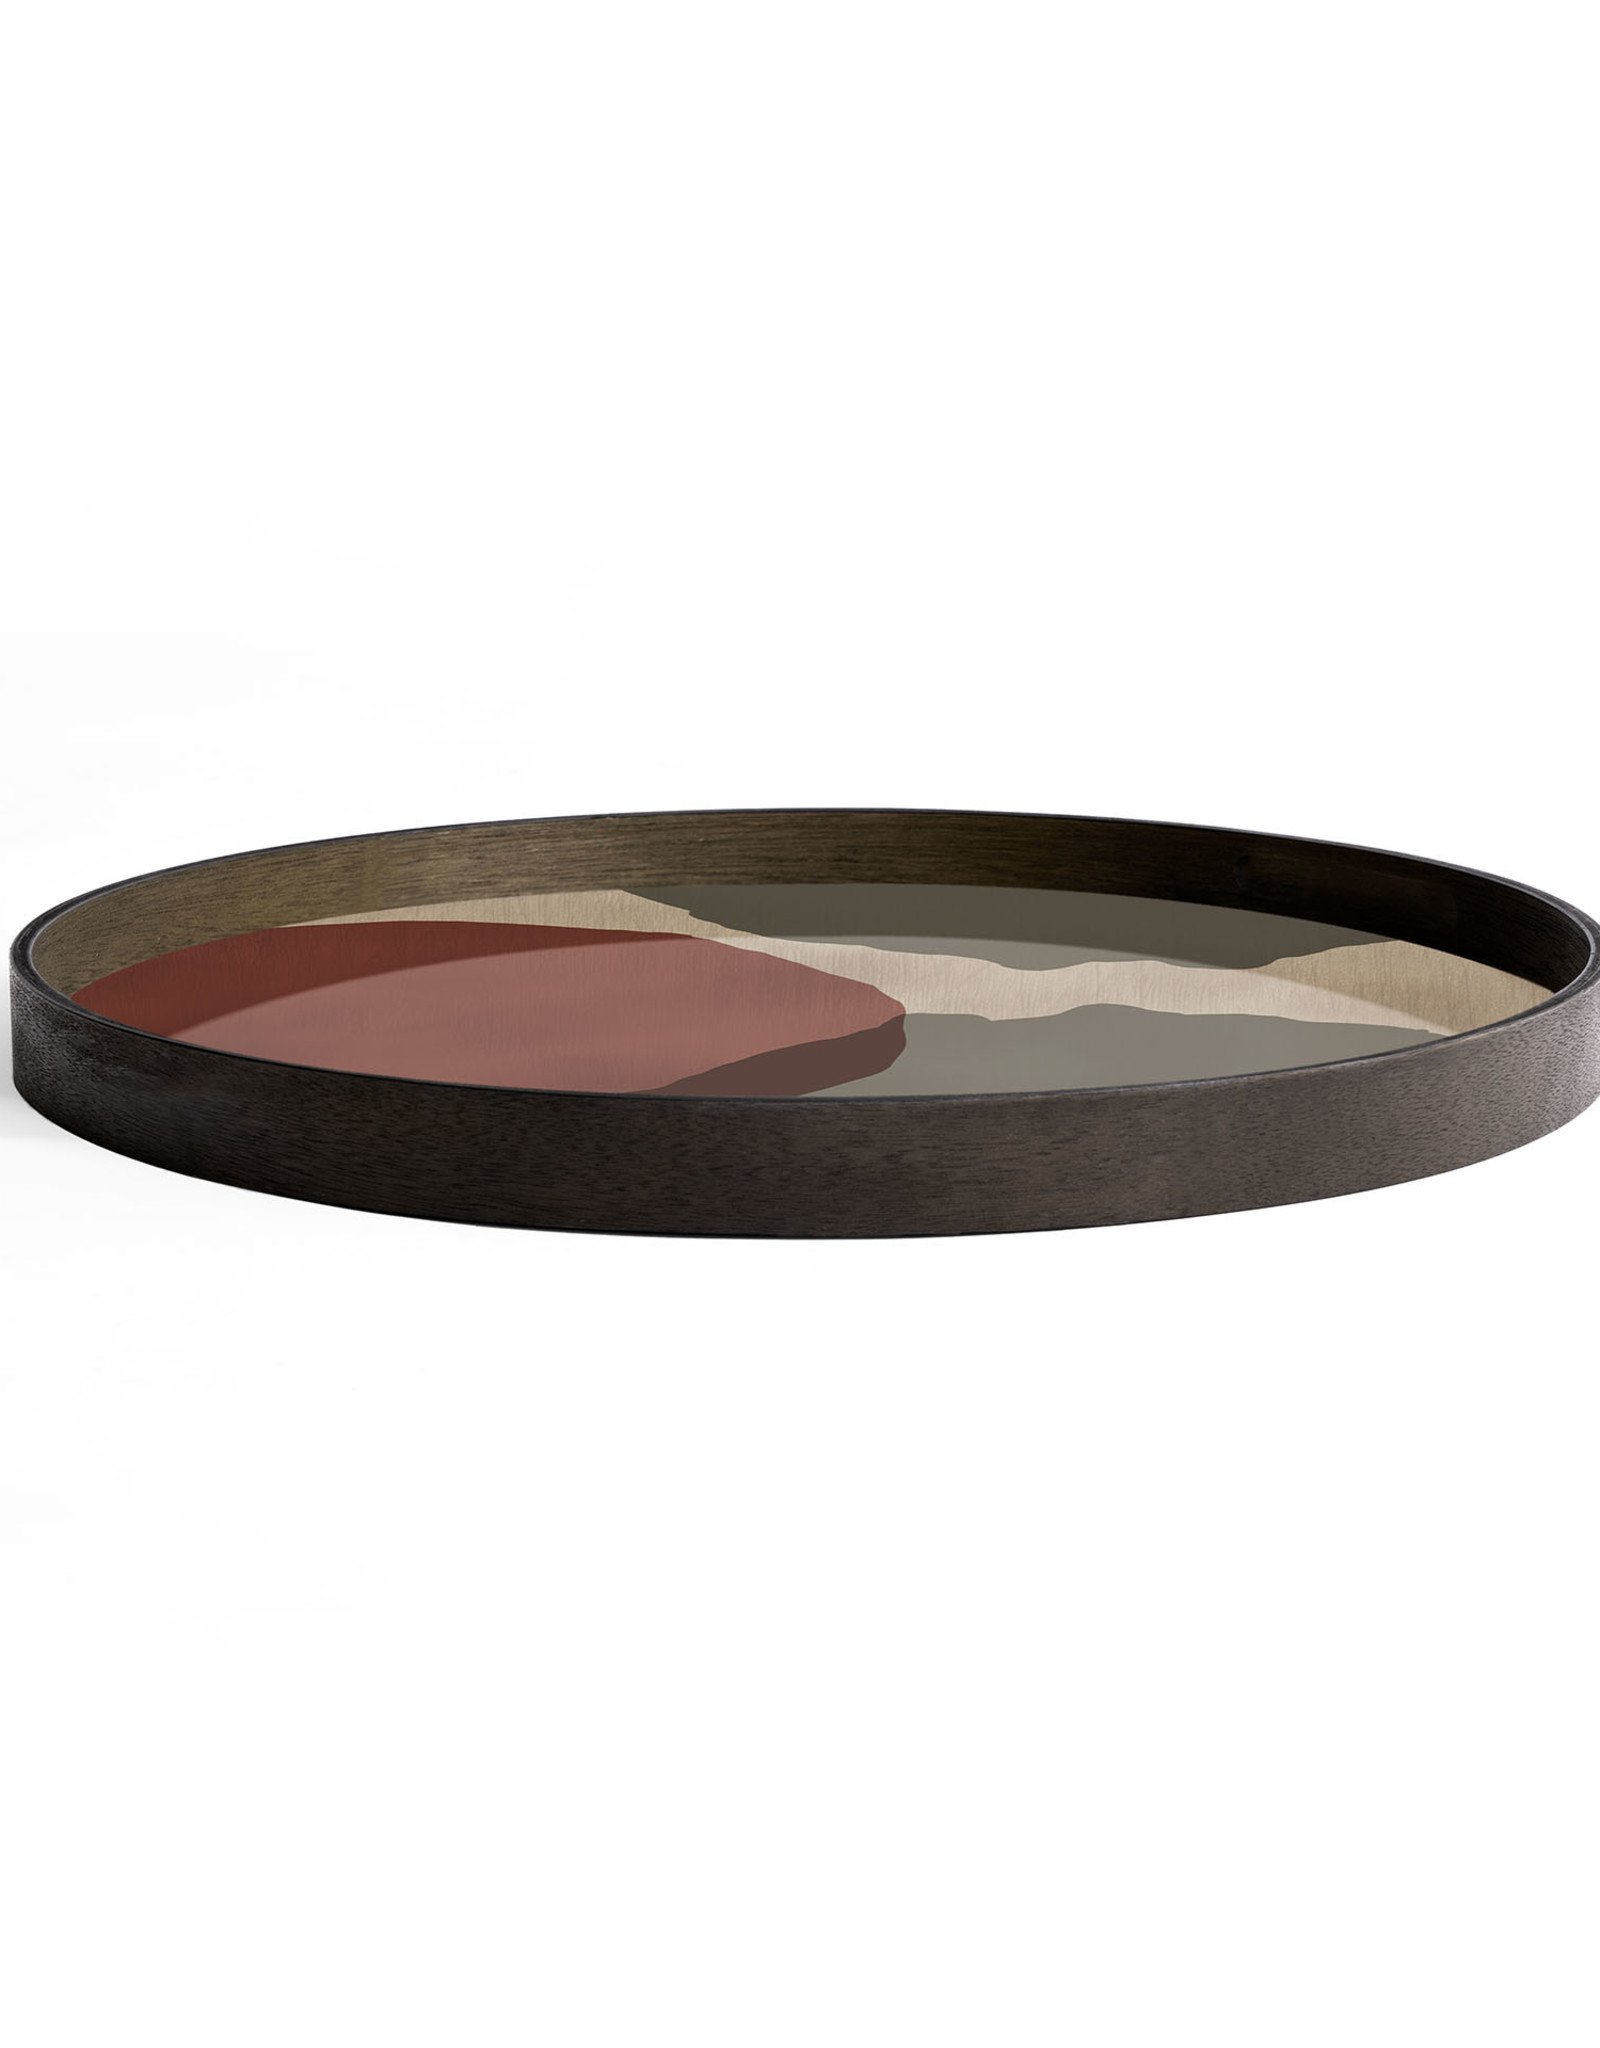 Overlapping Dots glass tray - round - L